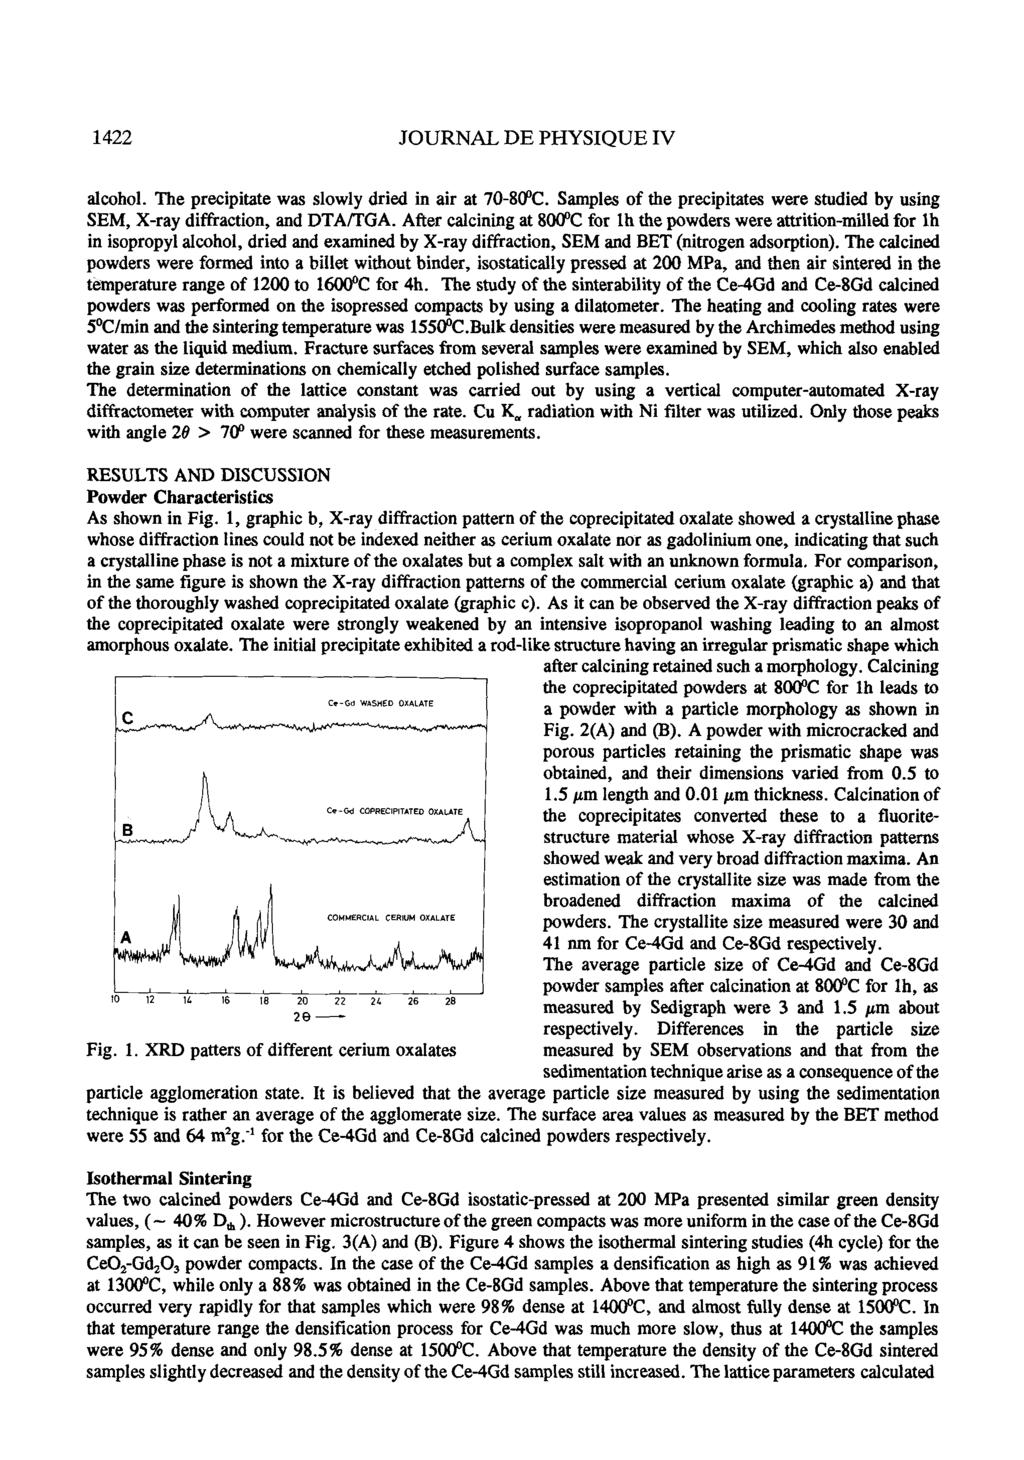 1422 JOURNAL DE PHYSIQUE IV alcohol. The precipitate was slowly dried in air at 70-8m. Samples of the precipitates were studied by using SEM, X-ray diffraction, and DTAJTGA.